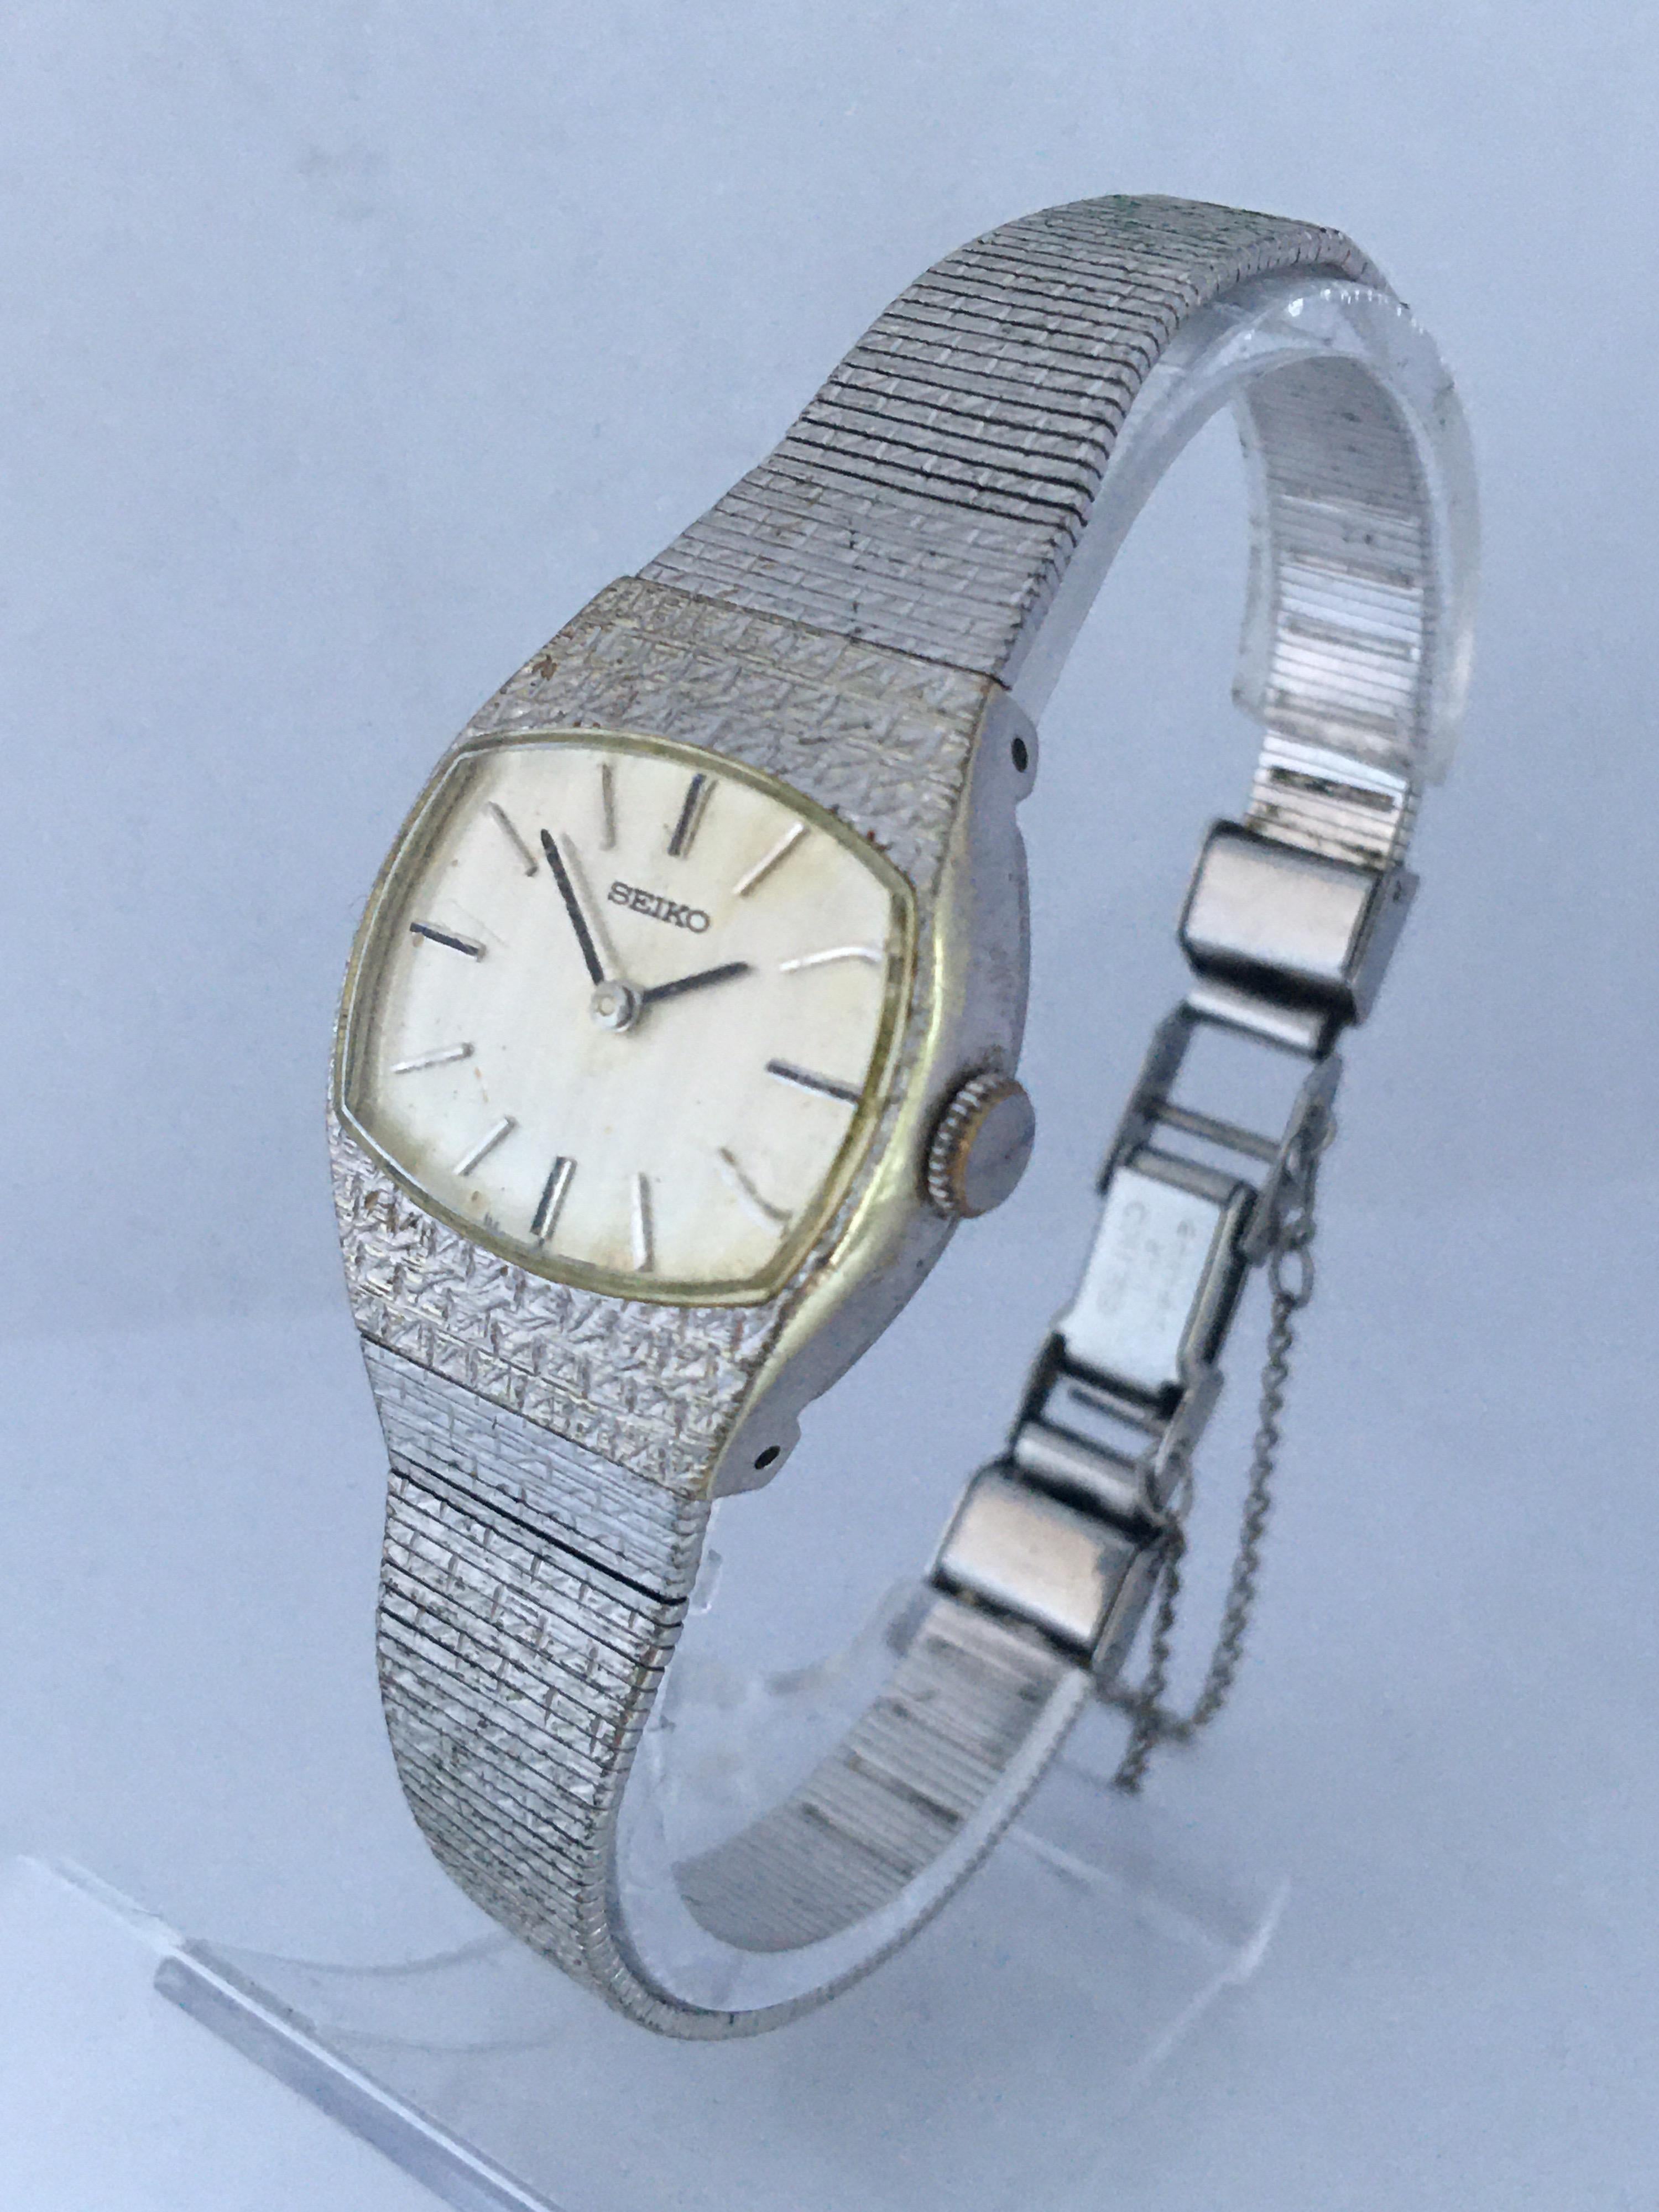 This beautiful 6.5 inches bracelet pre-owned Ladies Watch is working and it is running well. Visible signs of ageing and wear with some tiny scratches on its stainless steel back bracelet and some tarnished.

Please study the images carefully as